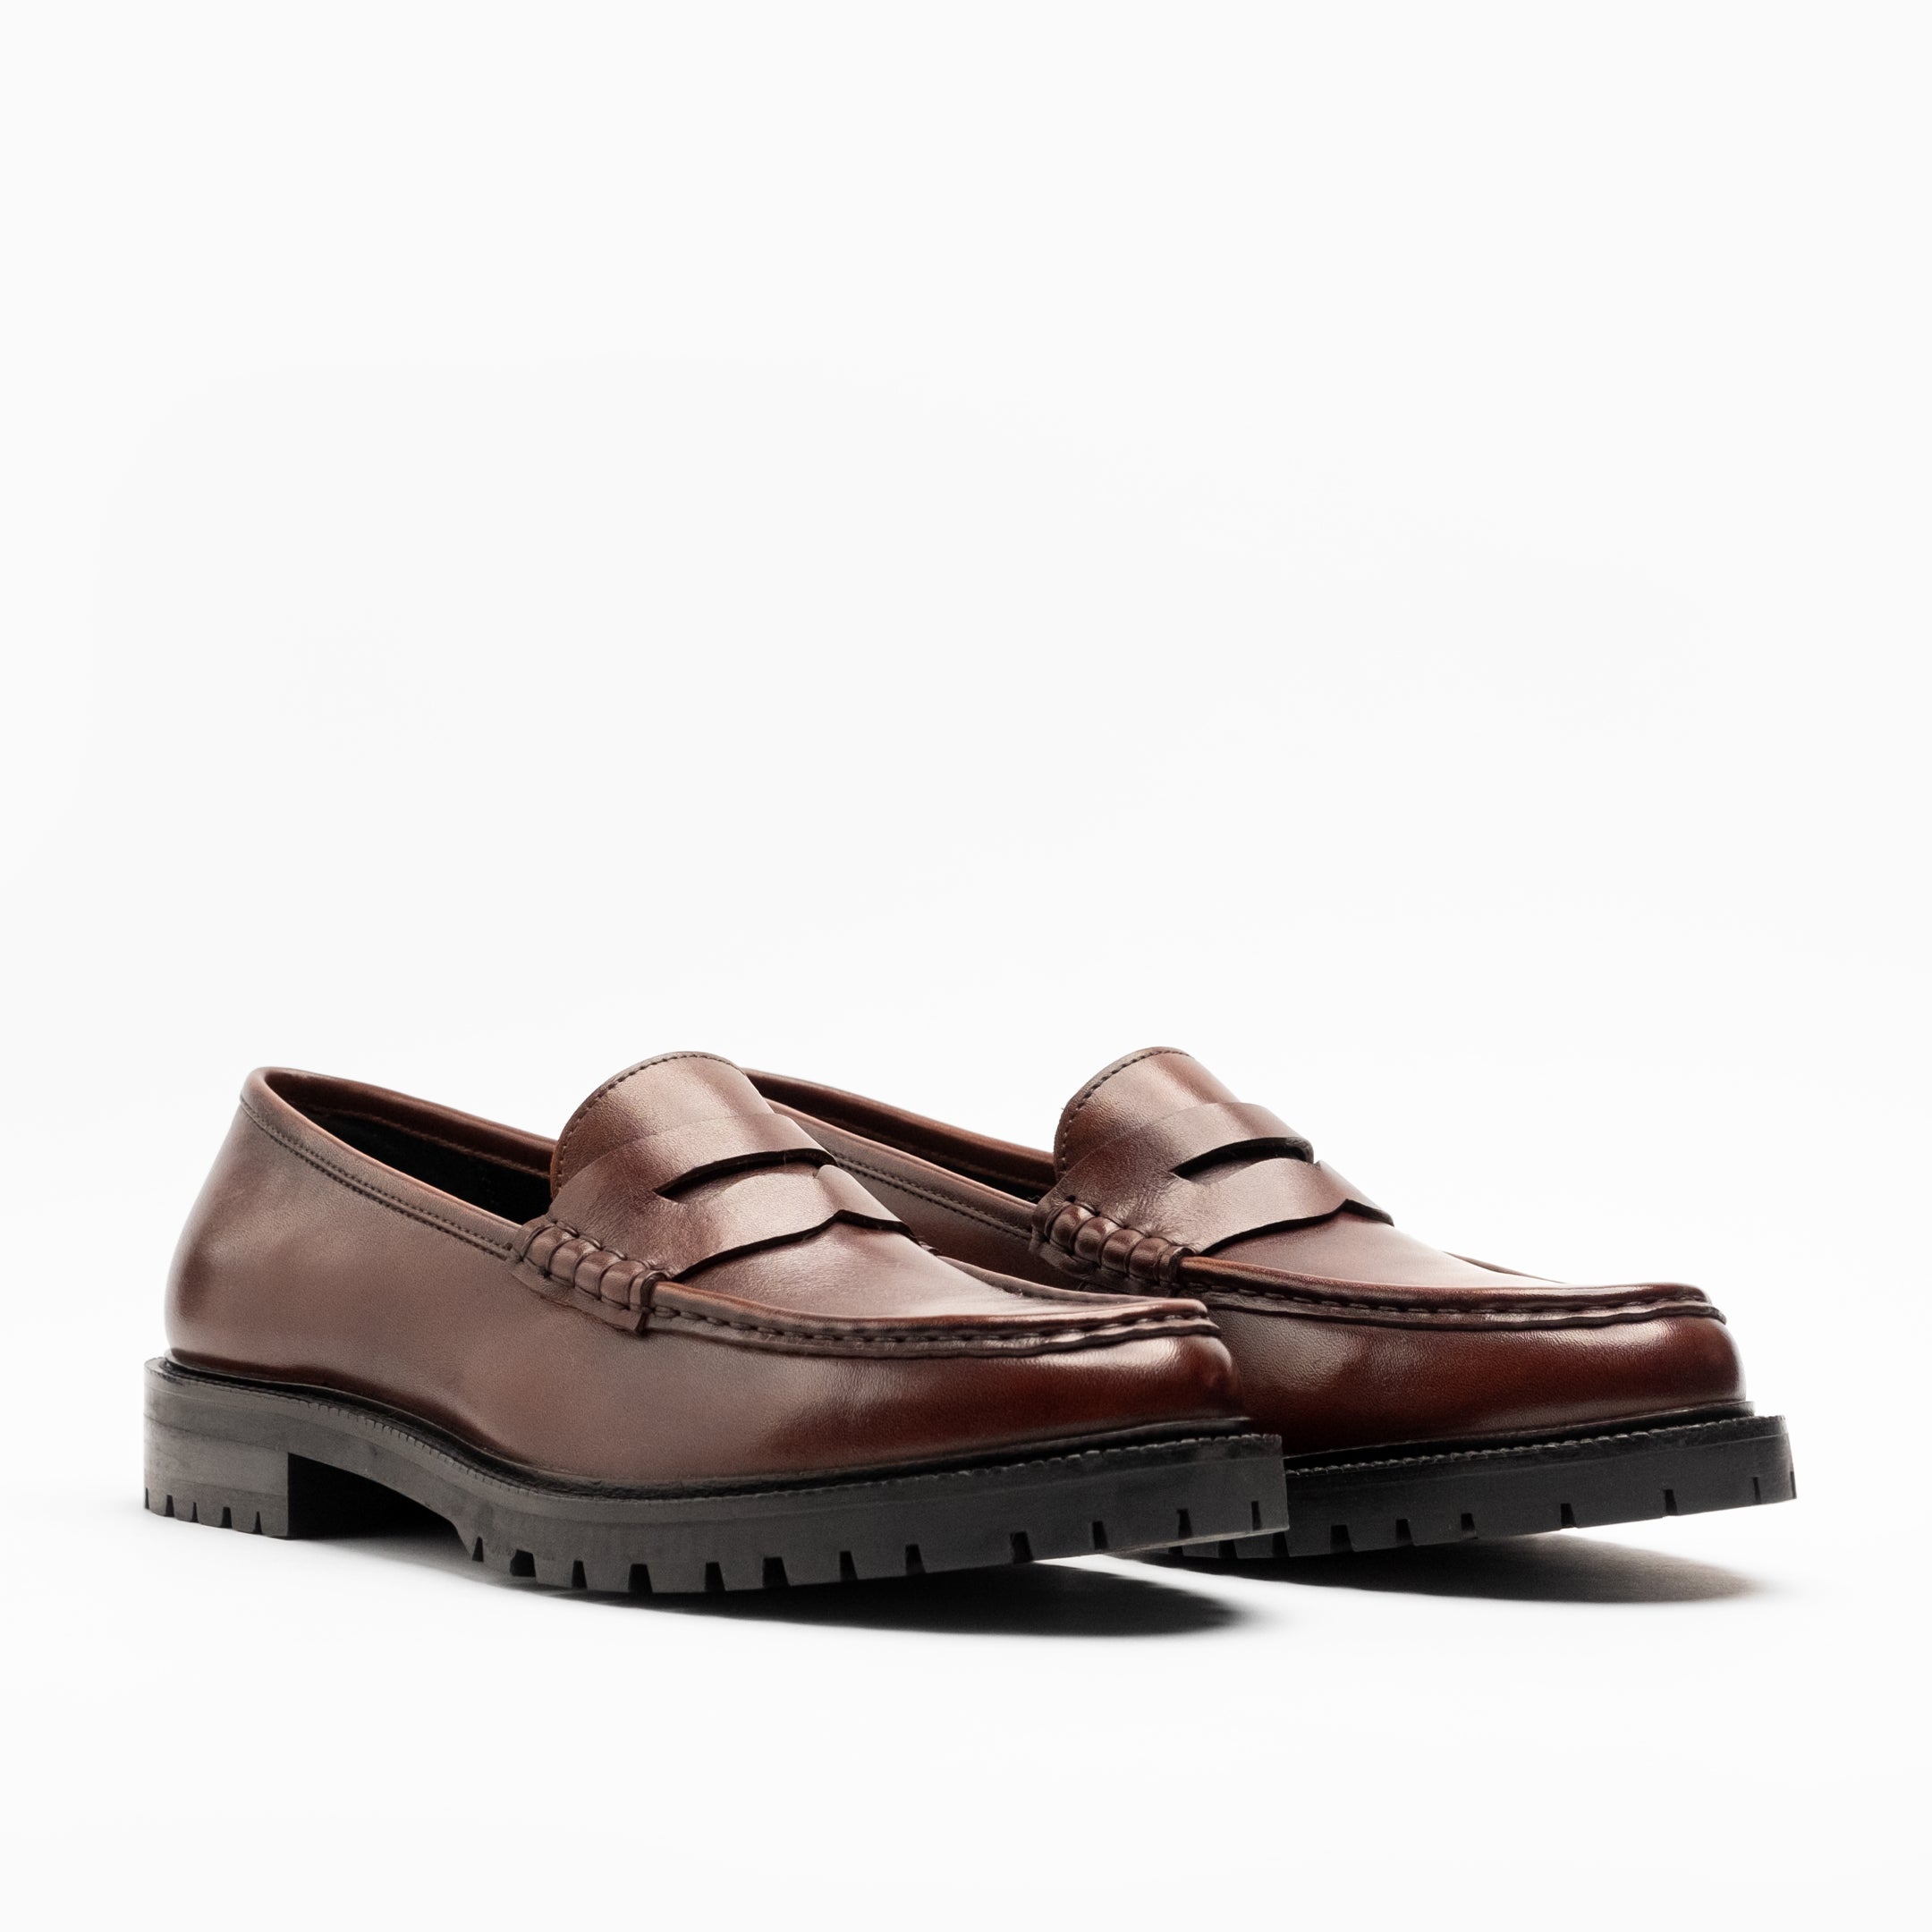 Walk London Mens Campus Saddle Loafer in Brown Leather